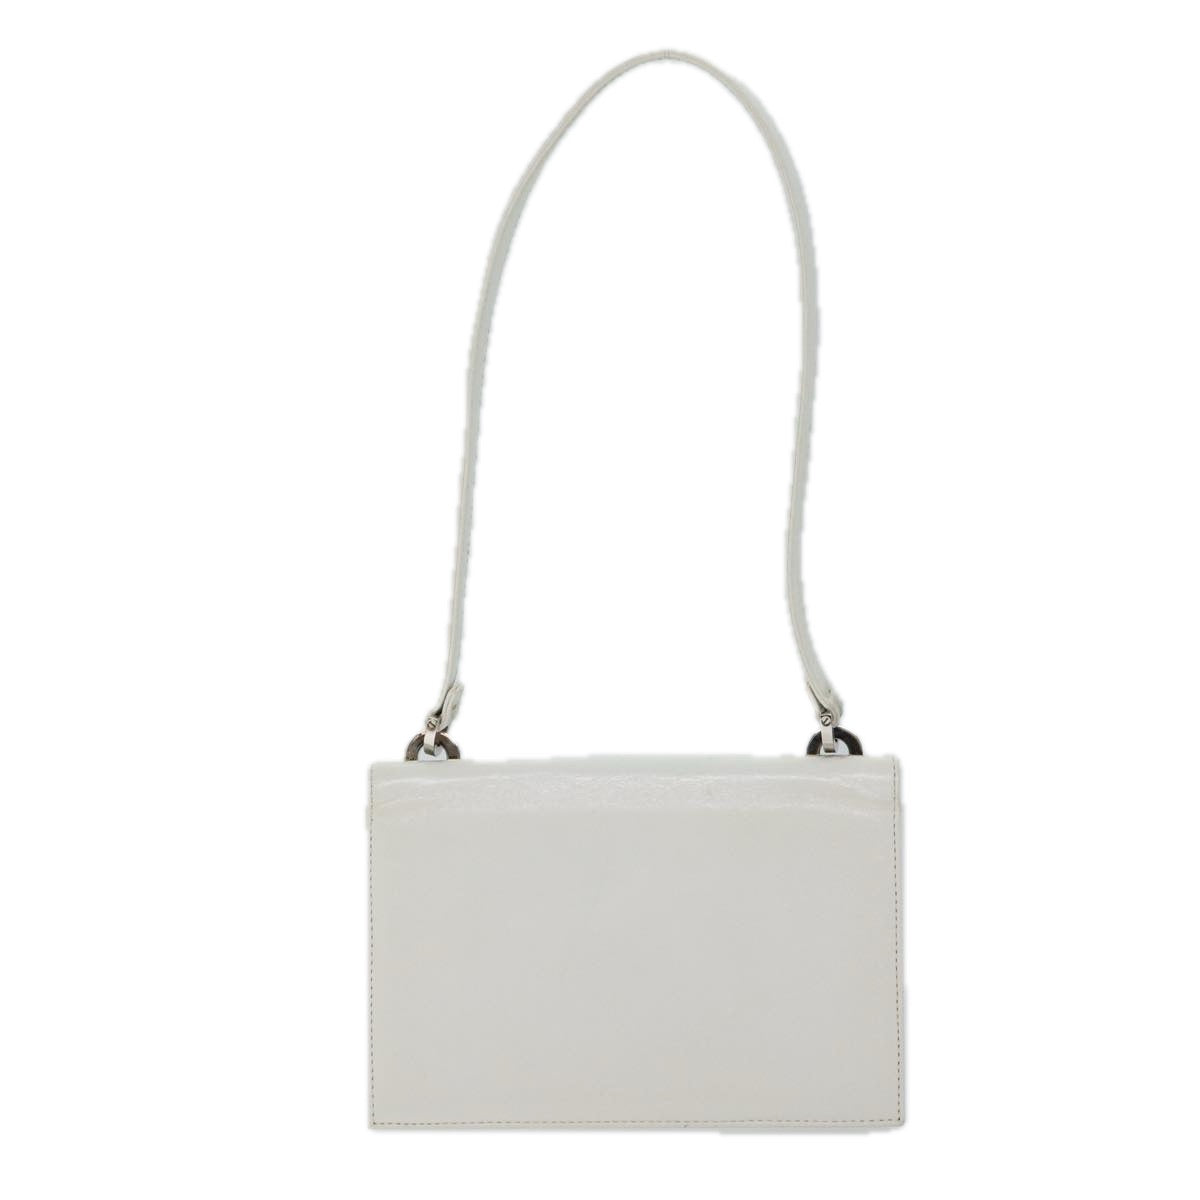 VALENTINO Shoulder Bag Leather White Auth bs13333 - 0